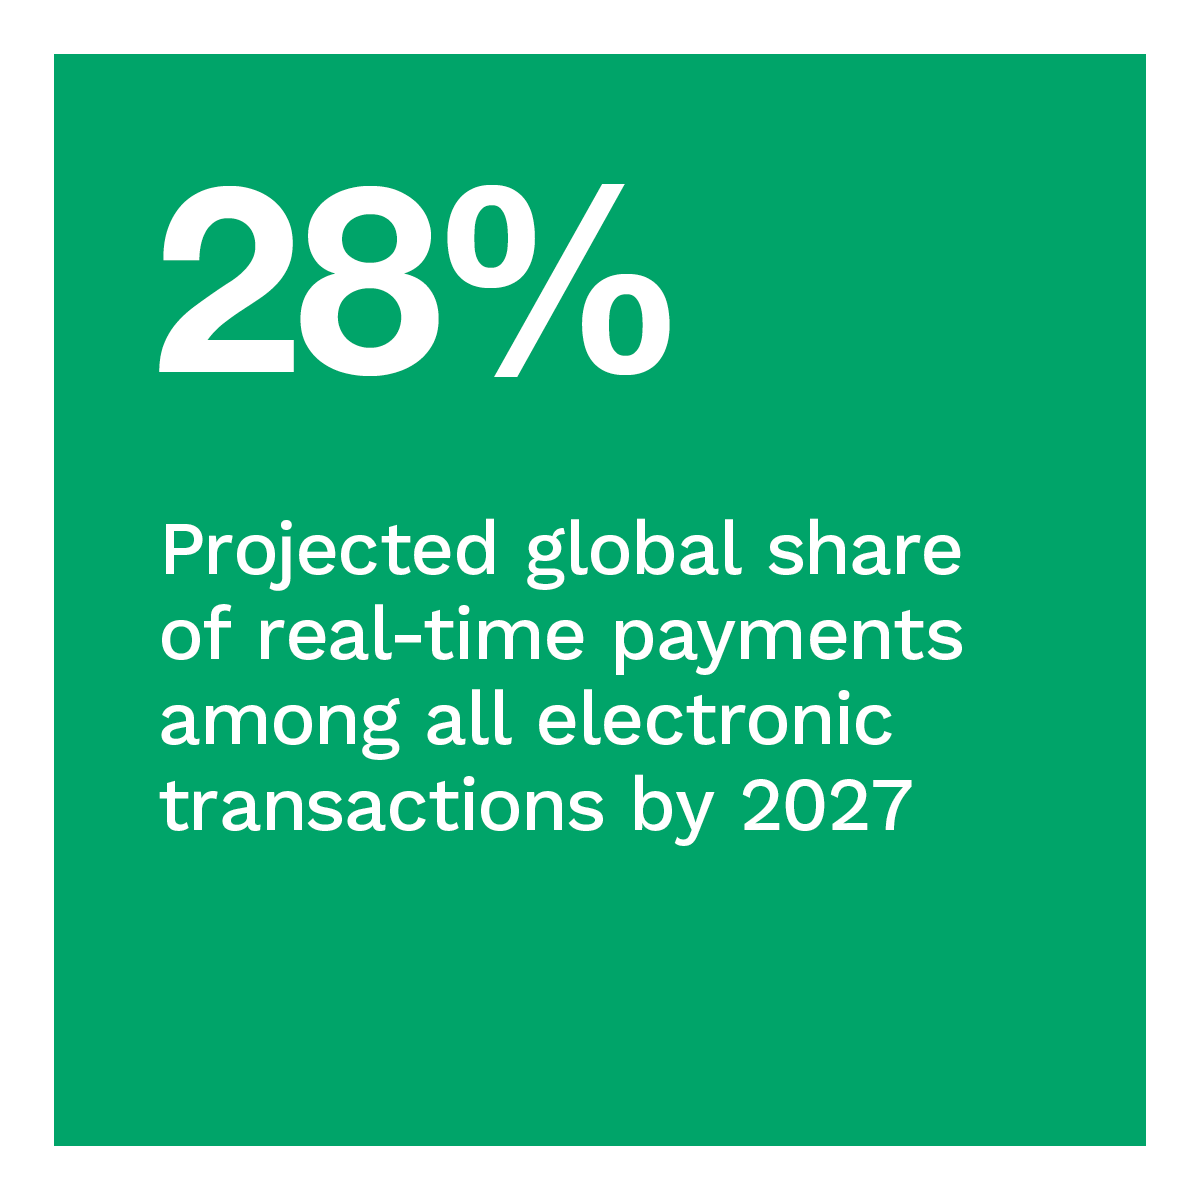 28%: Projected global share of real-time payments among all electronic transactions by 2027